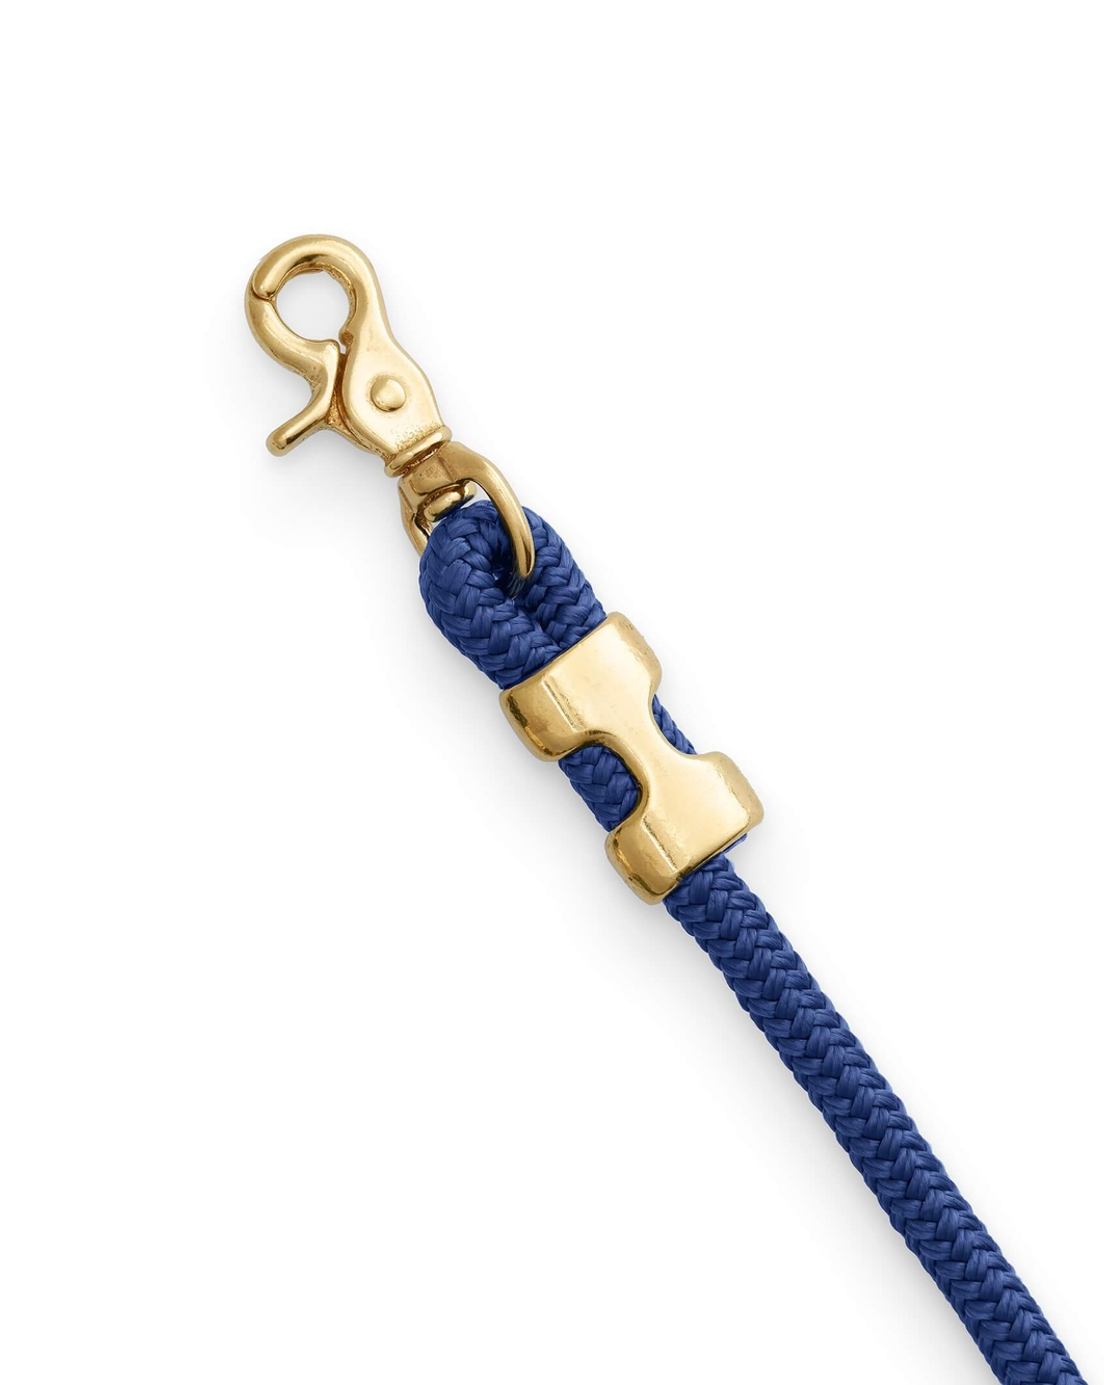 Double-braided nylon rope is accented with solid brass hardware for the perfect pop. <span data-mce-fragment="1">Made of the same material that is commonly used on boats year-round, this leash </span><span data-mce-fragment="1">will not mildew or fray when exposed to the elements. The included brass O-ring is perfect for attaching a waste bag or keys.&nbsp;</span>